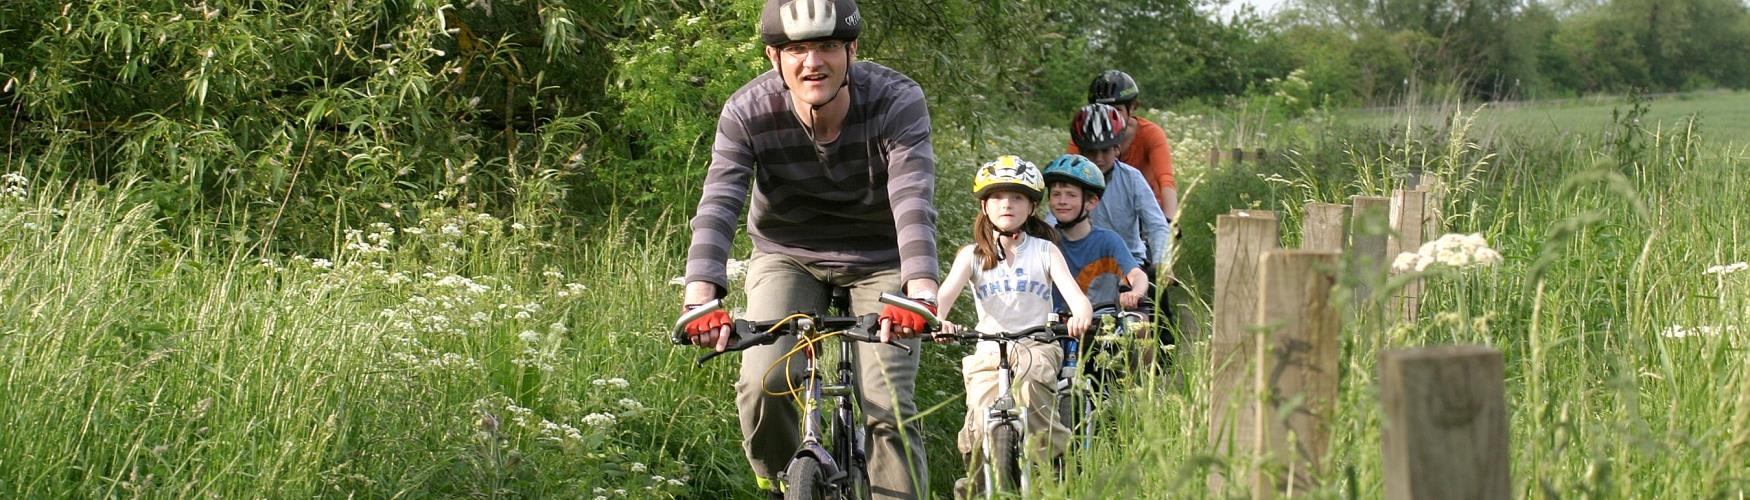 A family cycling in the countryside